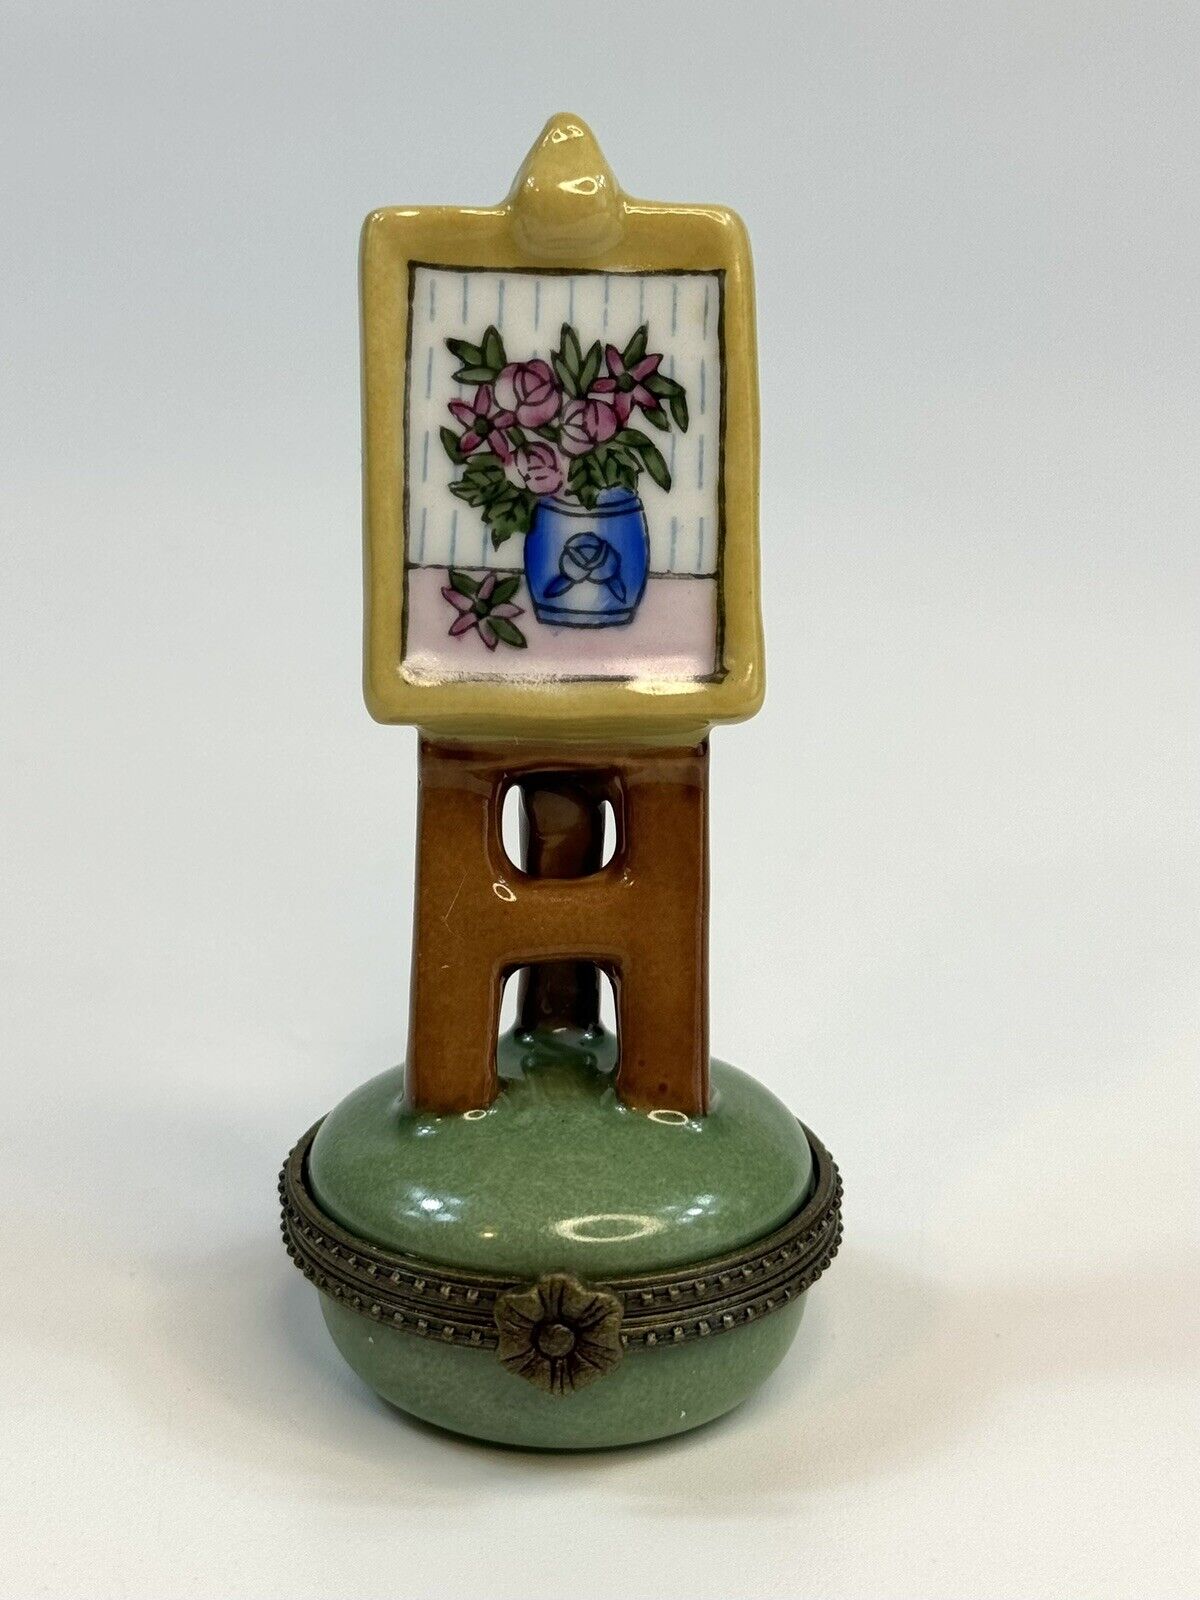 Porcelain Hinged Trinket Box Artist Easel with Painting Flowers Floral